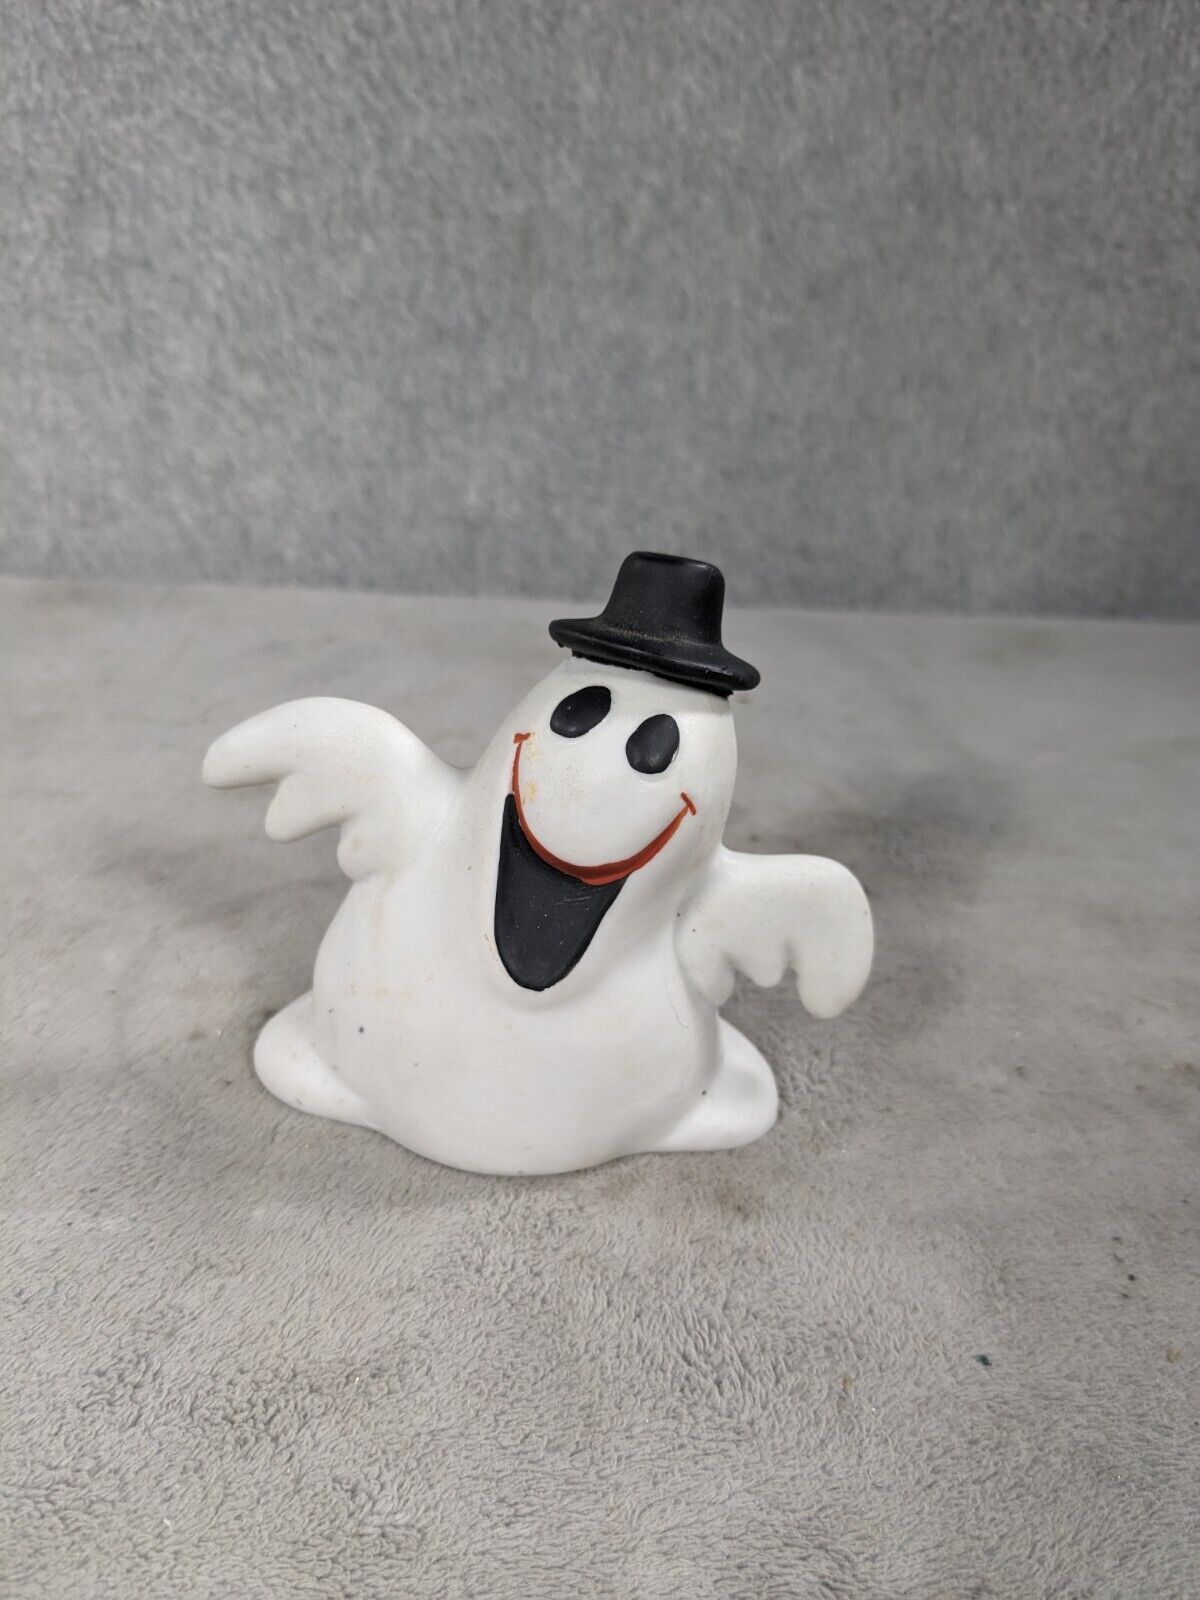 Vintage Ceramic Halloween Silly Ghost Figure In Hat Shelf Decor 4\' Tall 